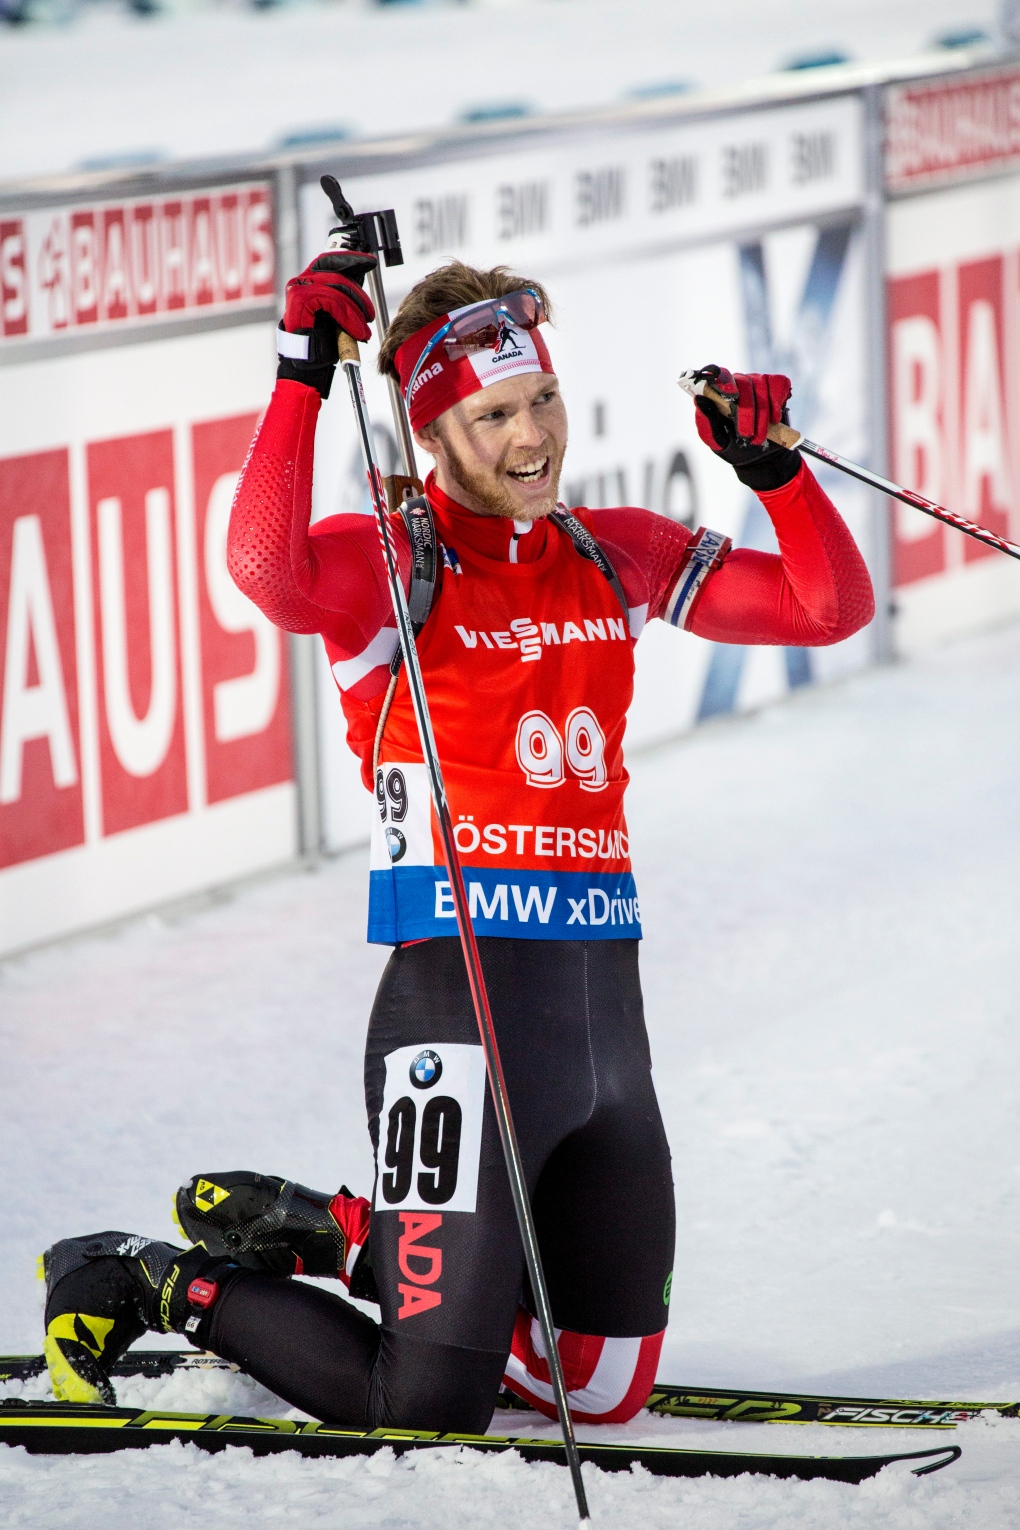 Canadian Macx Davies notches career best with 10th place finish at biathlon World Cup CTV News